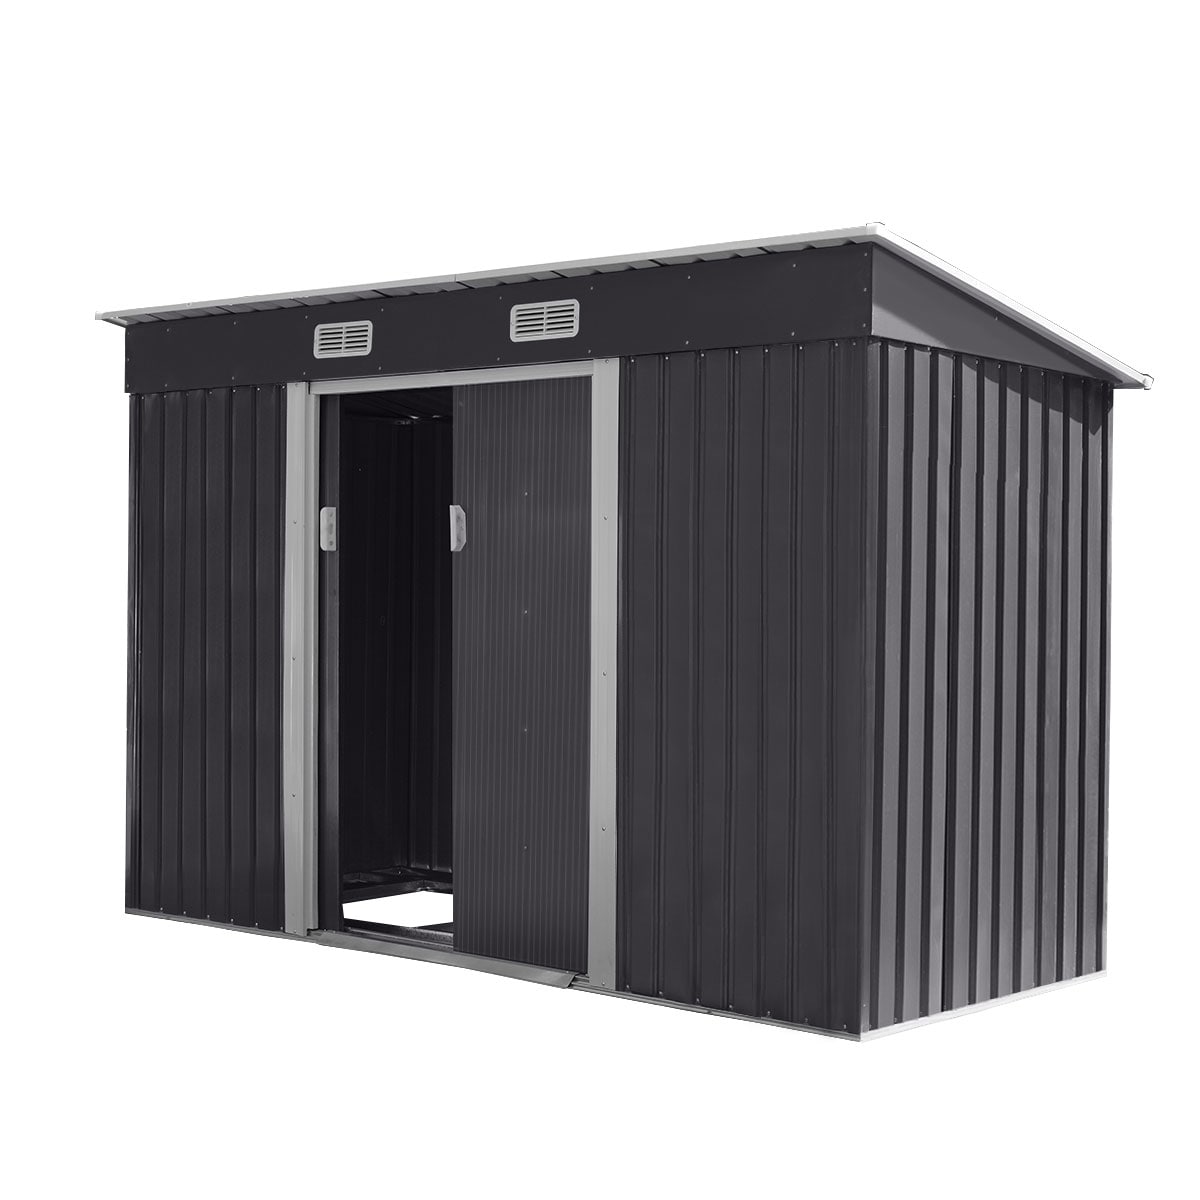 Green & White Godyluck 9 x 4 Outdoor Metal Garden Storage Shed with Double Sliding Doors and 2 Vents for Lighting and Airflow